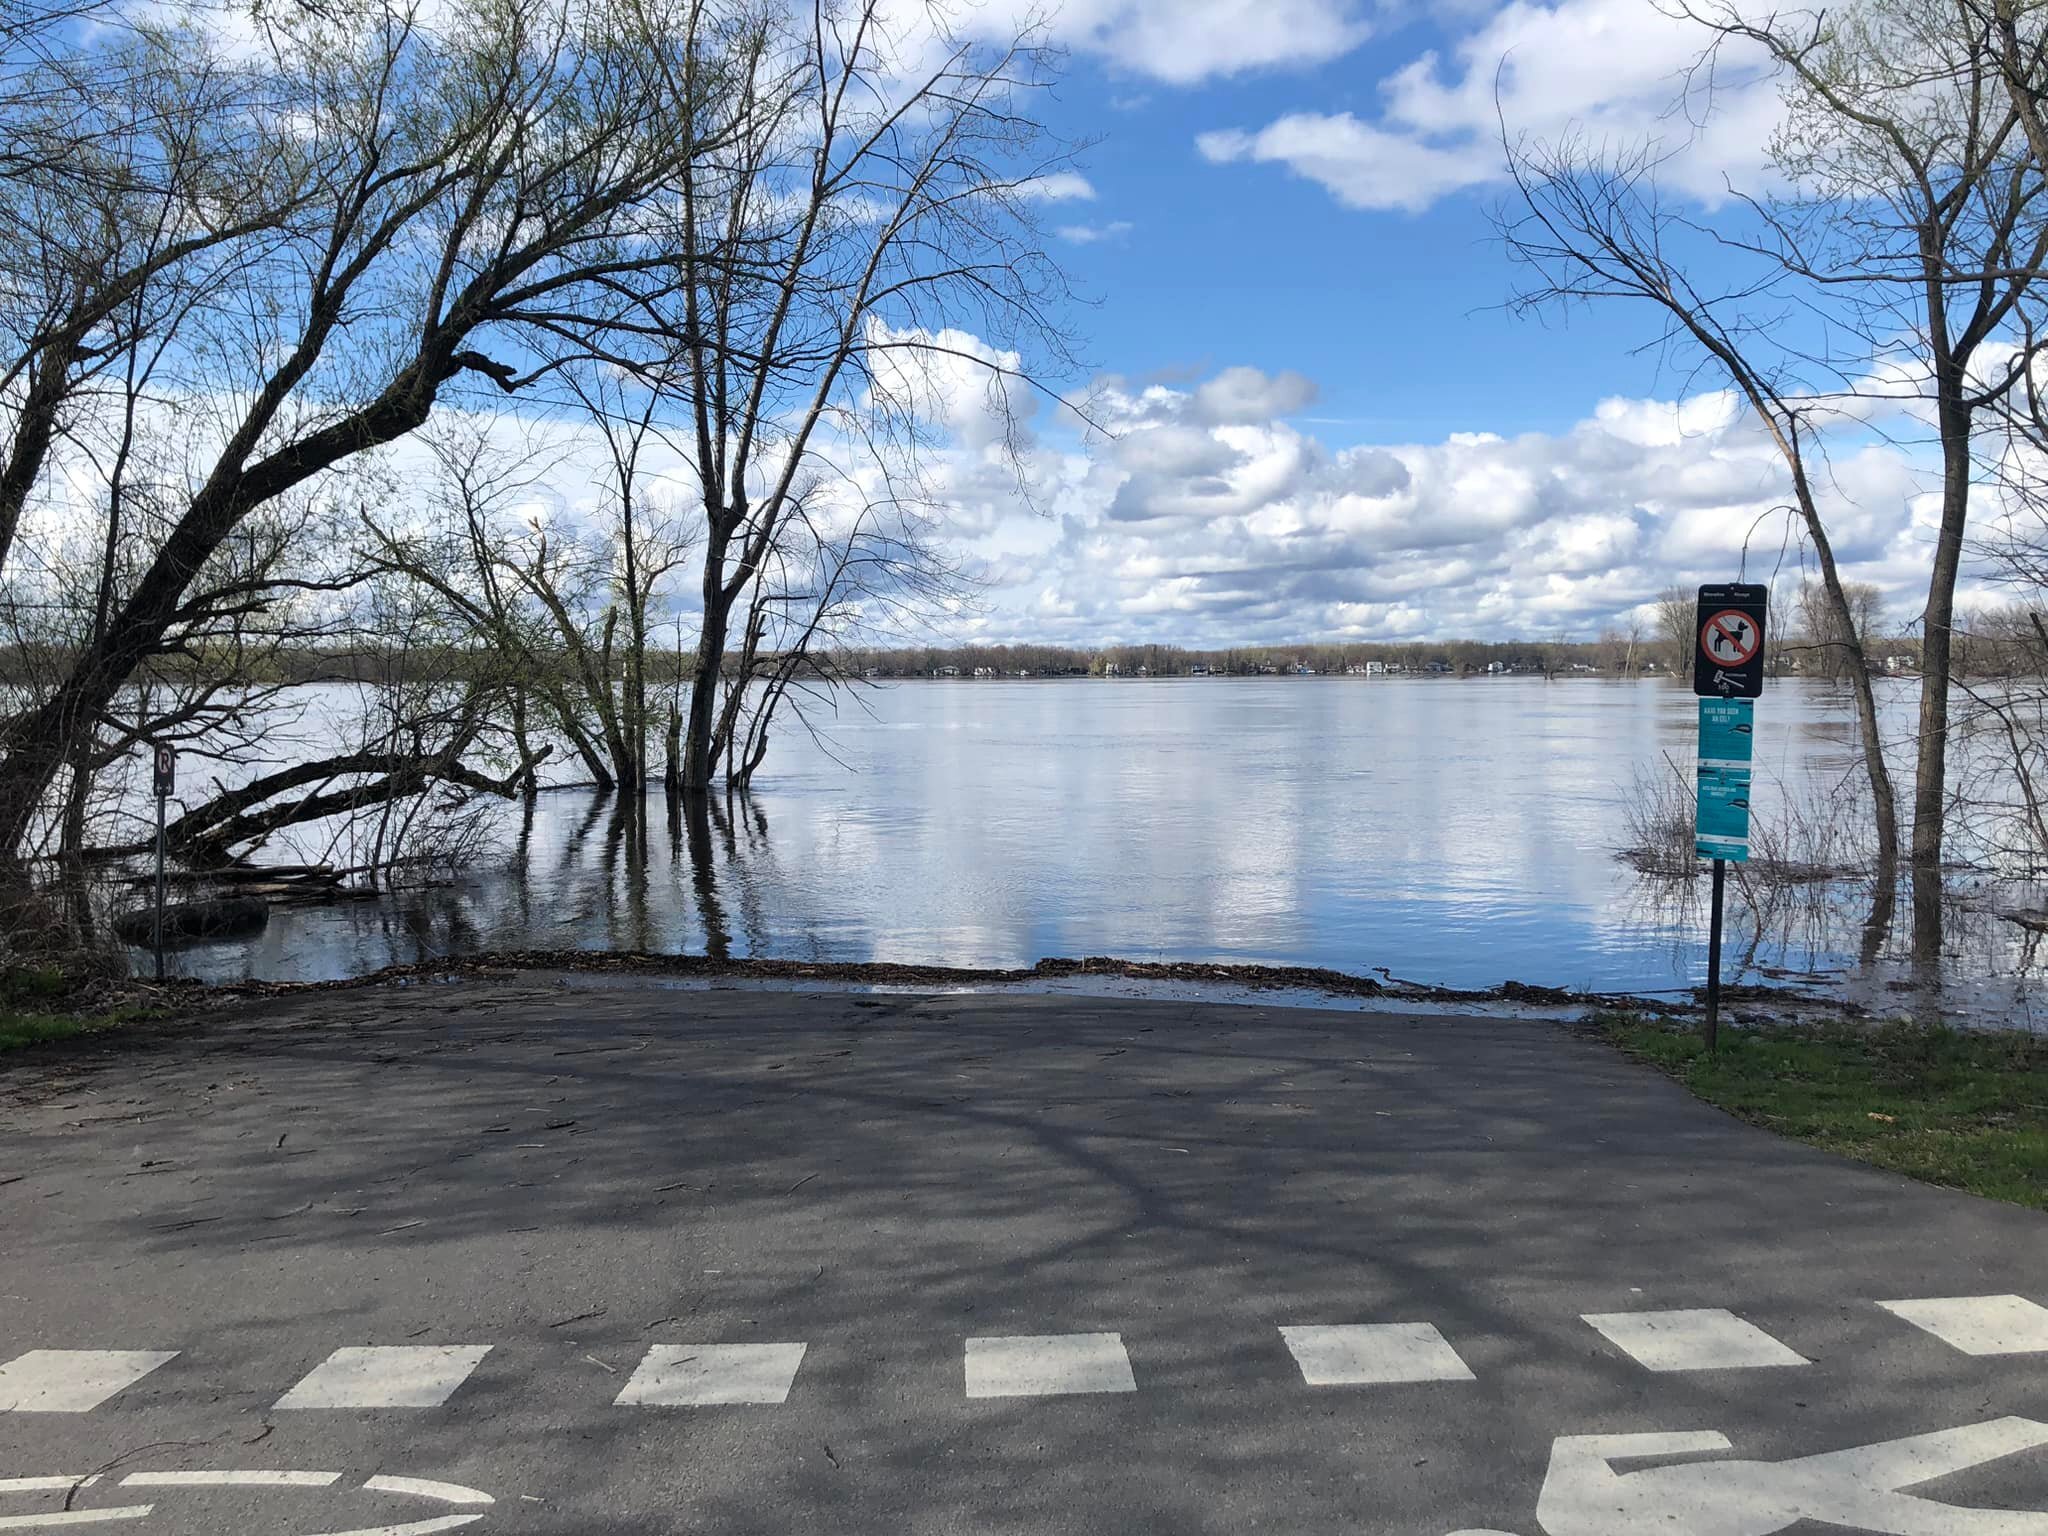 In a quest to find a launching point for our kayaks we checked out both Petrie Island and Blair. Petrie offers the best with kayaking right from the road, provided you can first find the road.